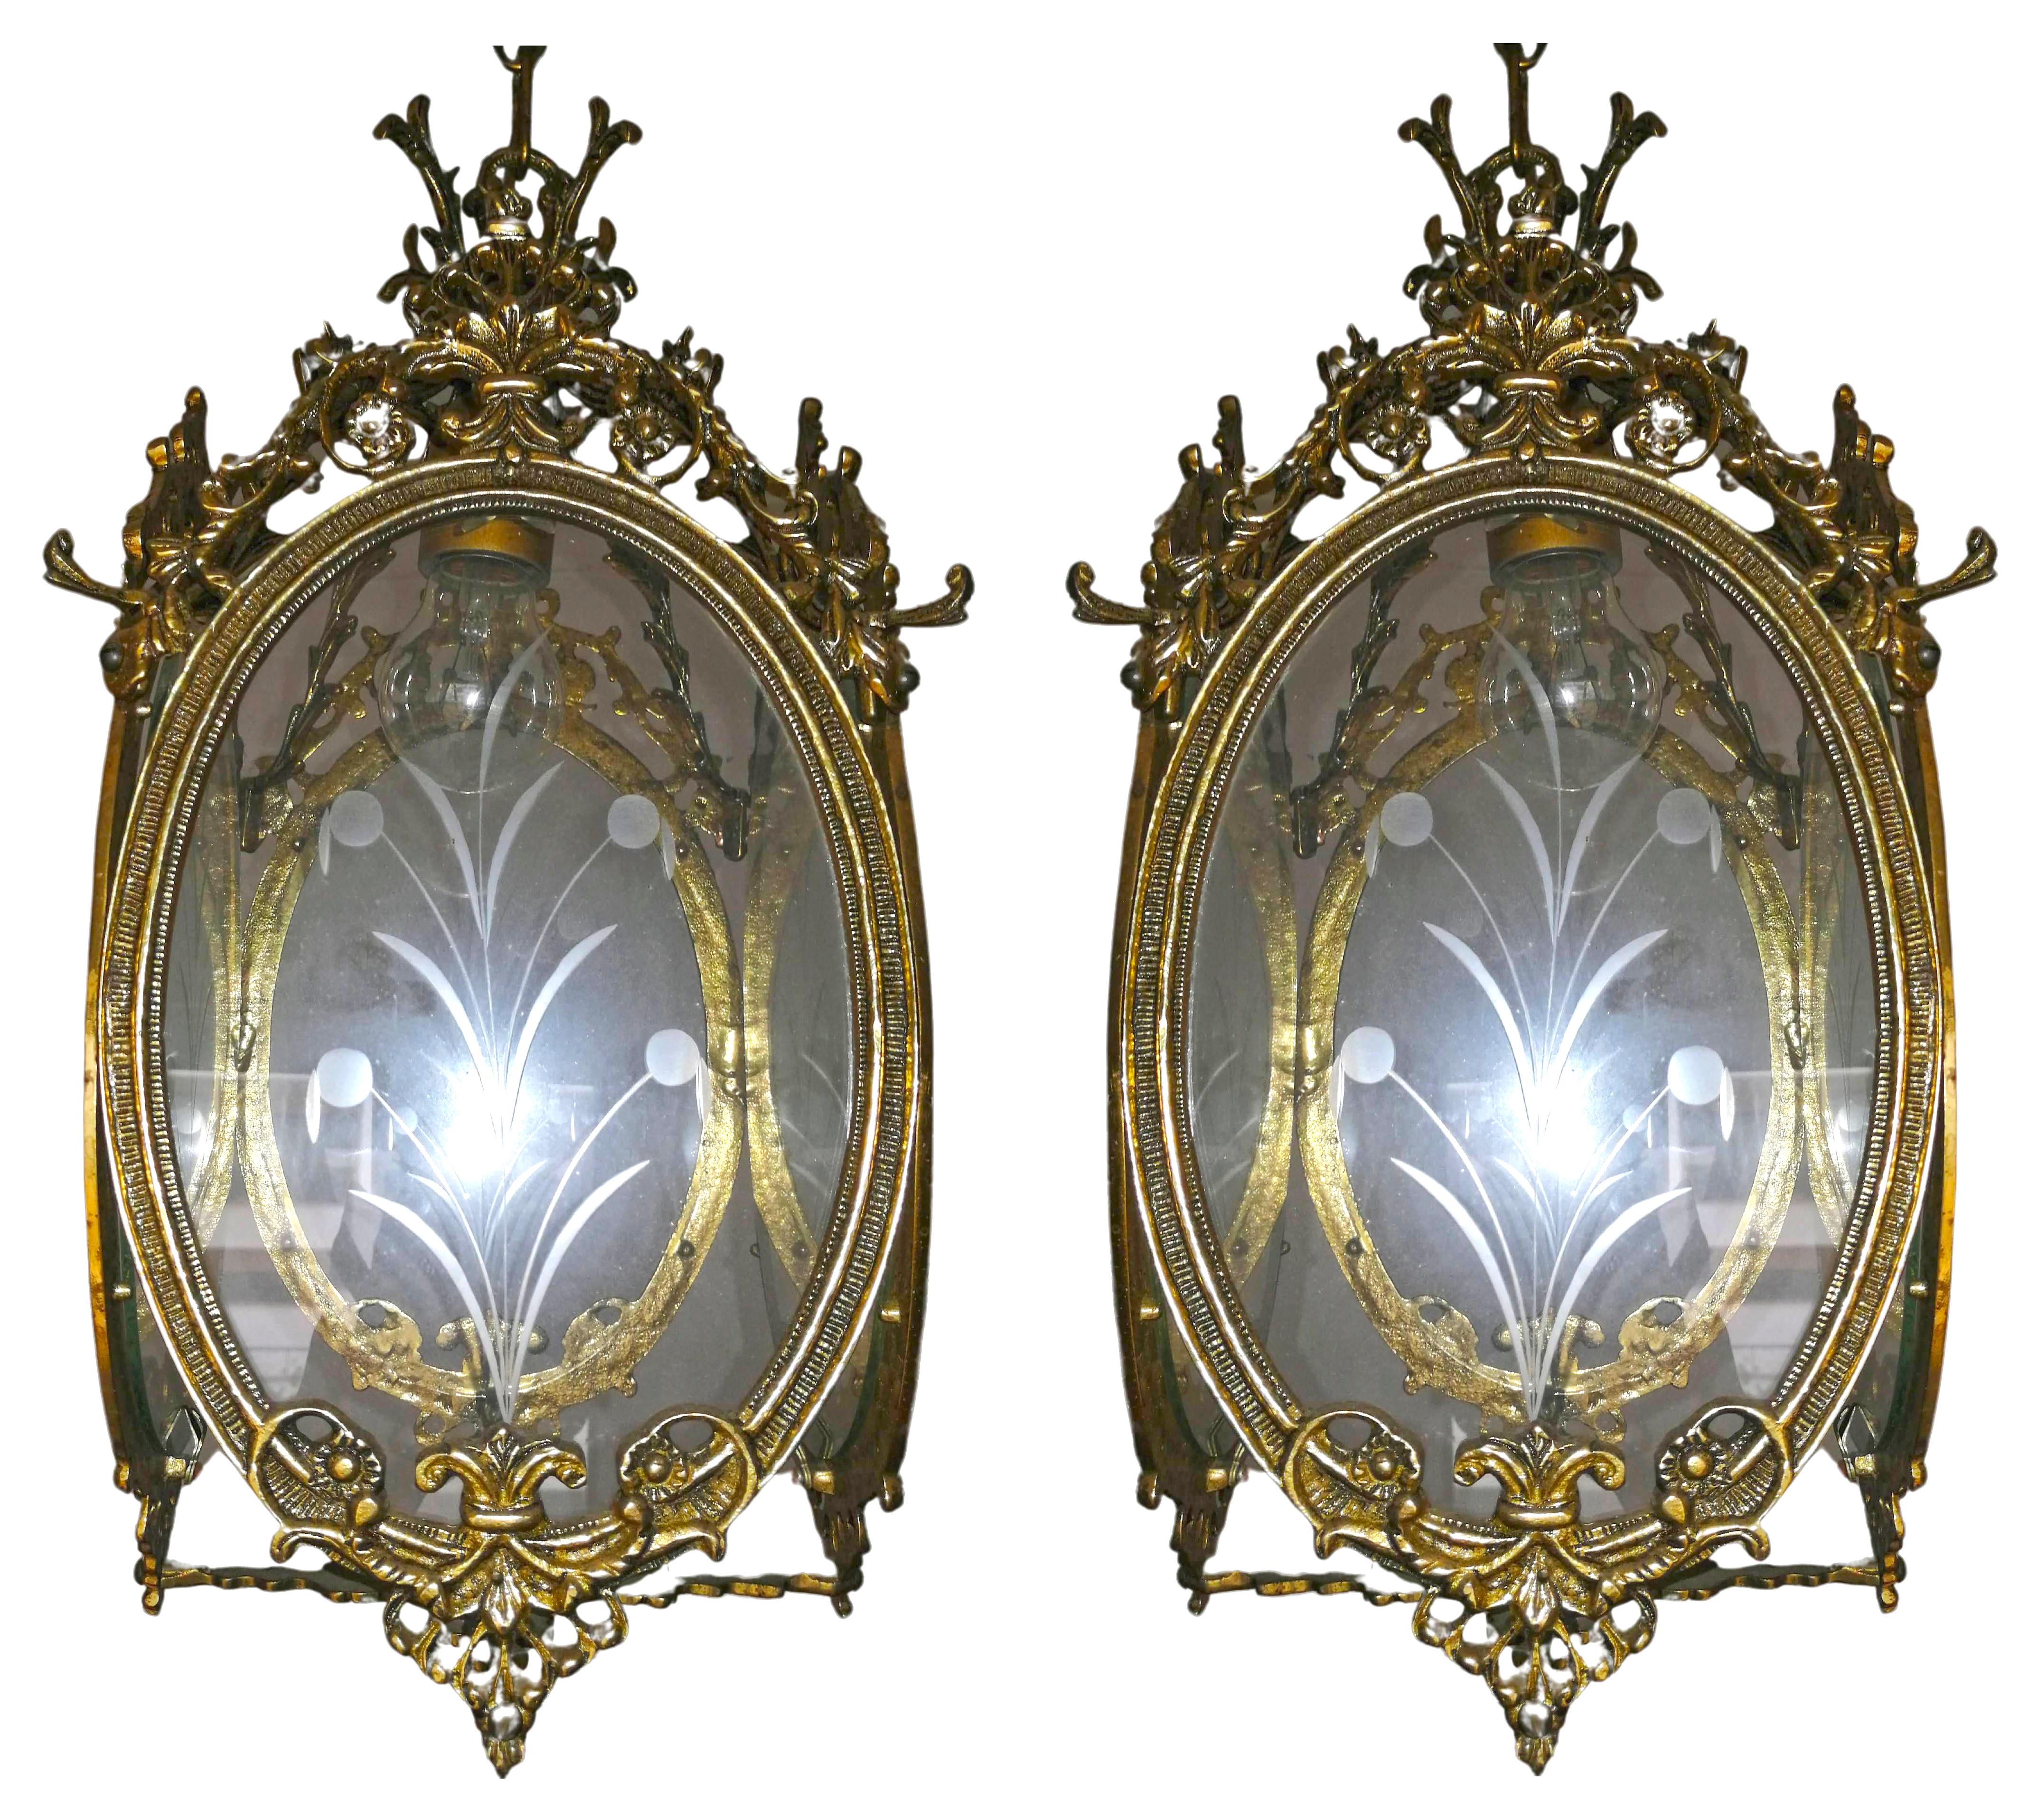 20th Century Pair of Antique Louis XVI French Lanterns Chandeliers in Gilt Bronze & Cut Glass For Sale